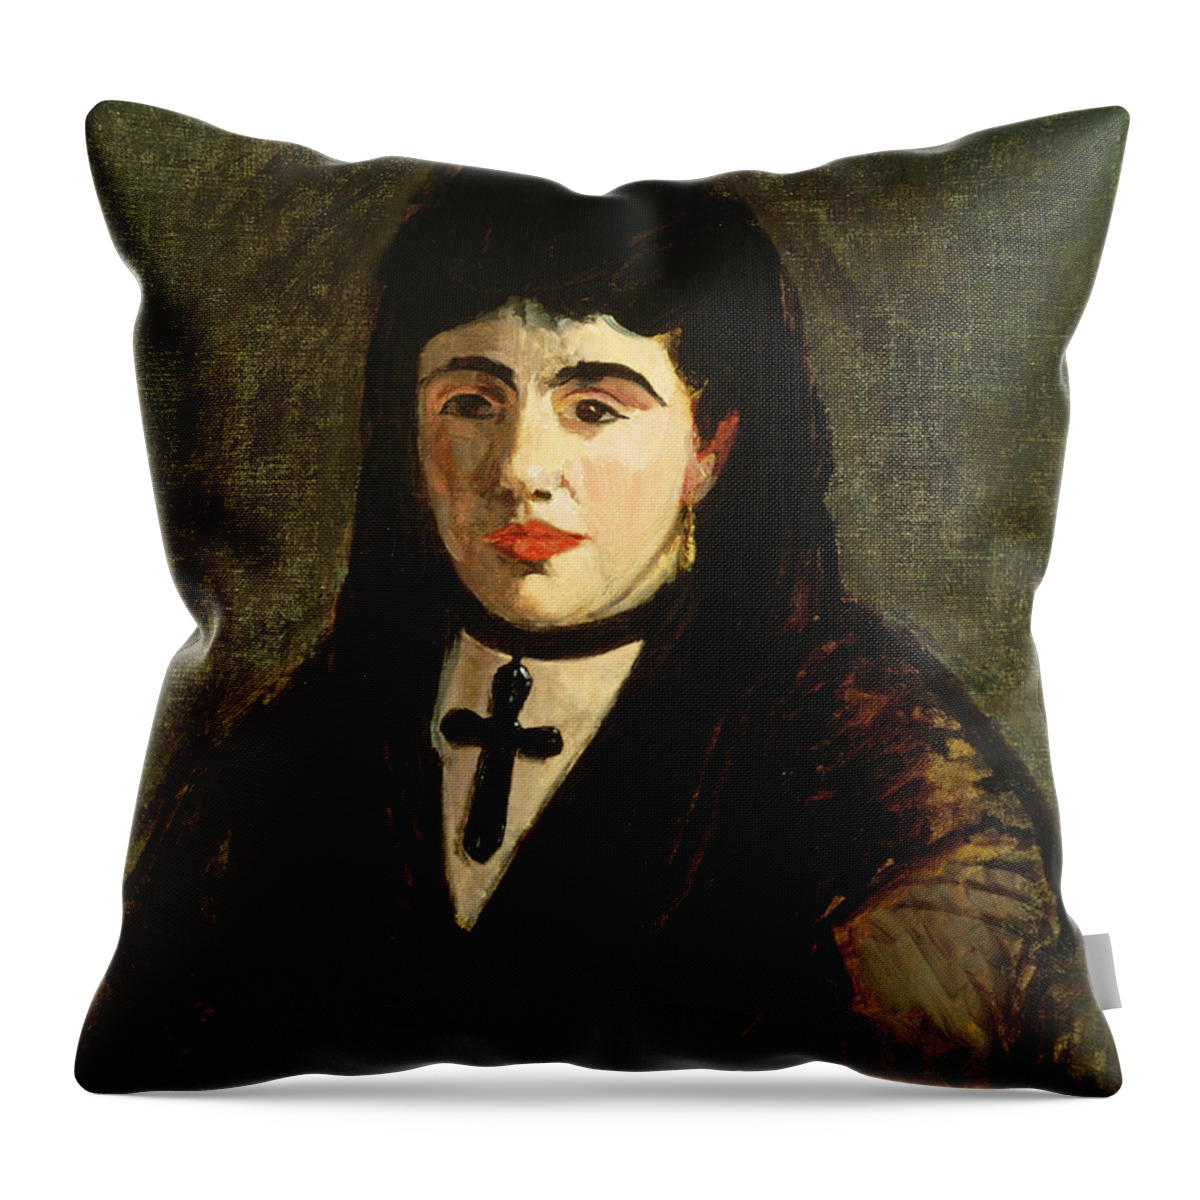 Spanish Throw Pillow featuring the painting The Spaniard by Edouard Manet